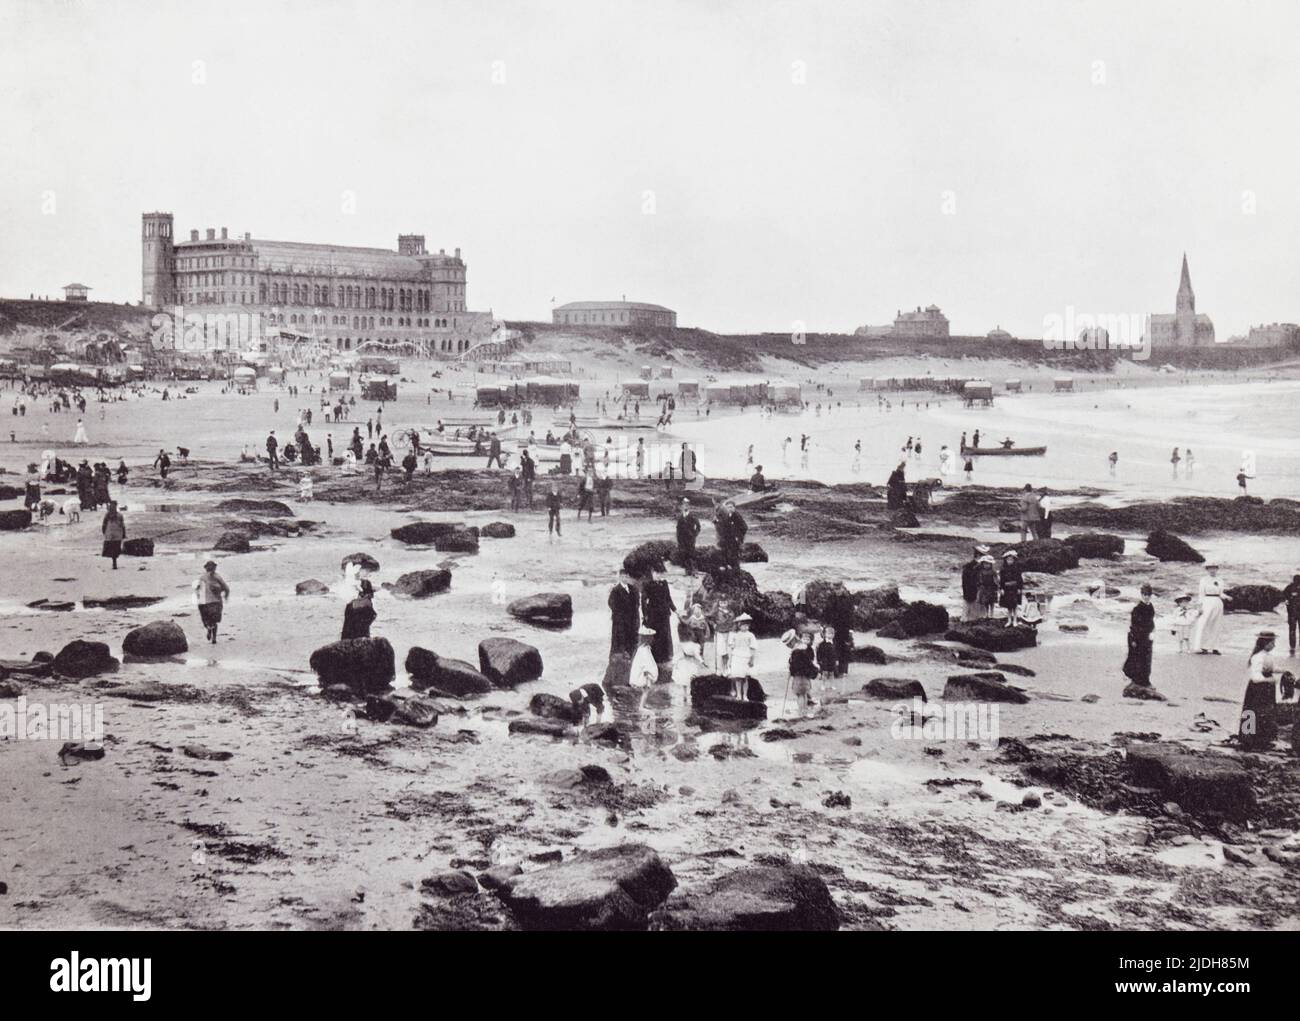 Tynemouth, North Tyneside, England, The Aquarium and sands, seen here in the 19th century.  From Around The Coast,  An Album of Pictures from Photographs of the Chief Seaside Places of Interest in Great Britain and Ireland published London, 1895, by George Newnes Limited. Stock Photo